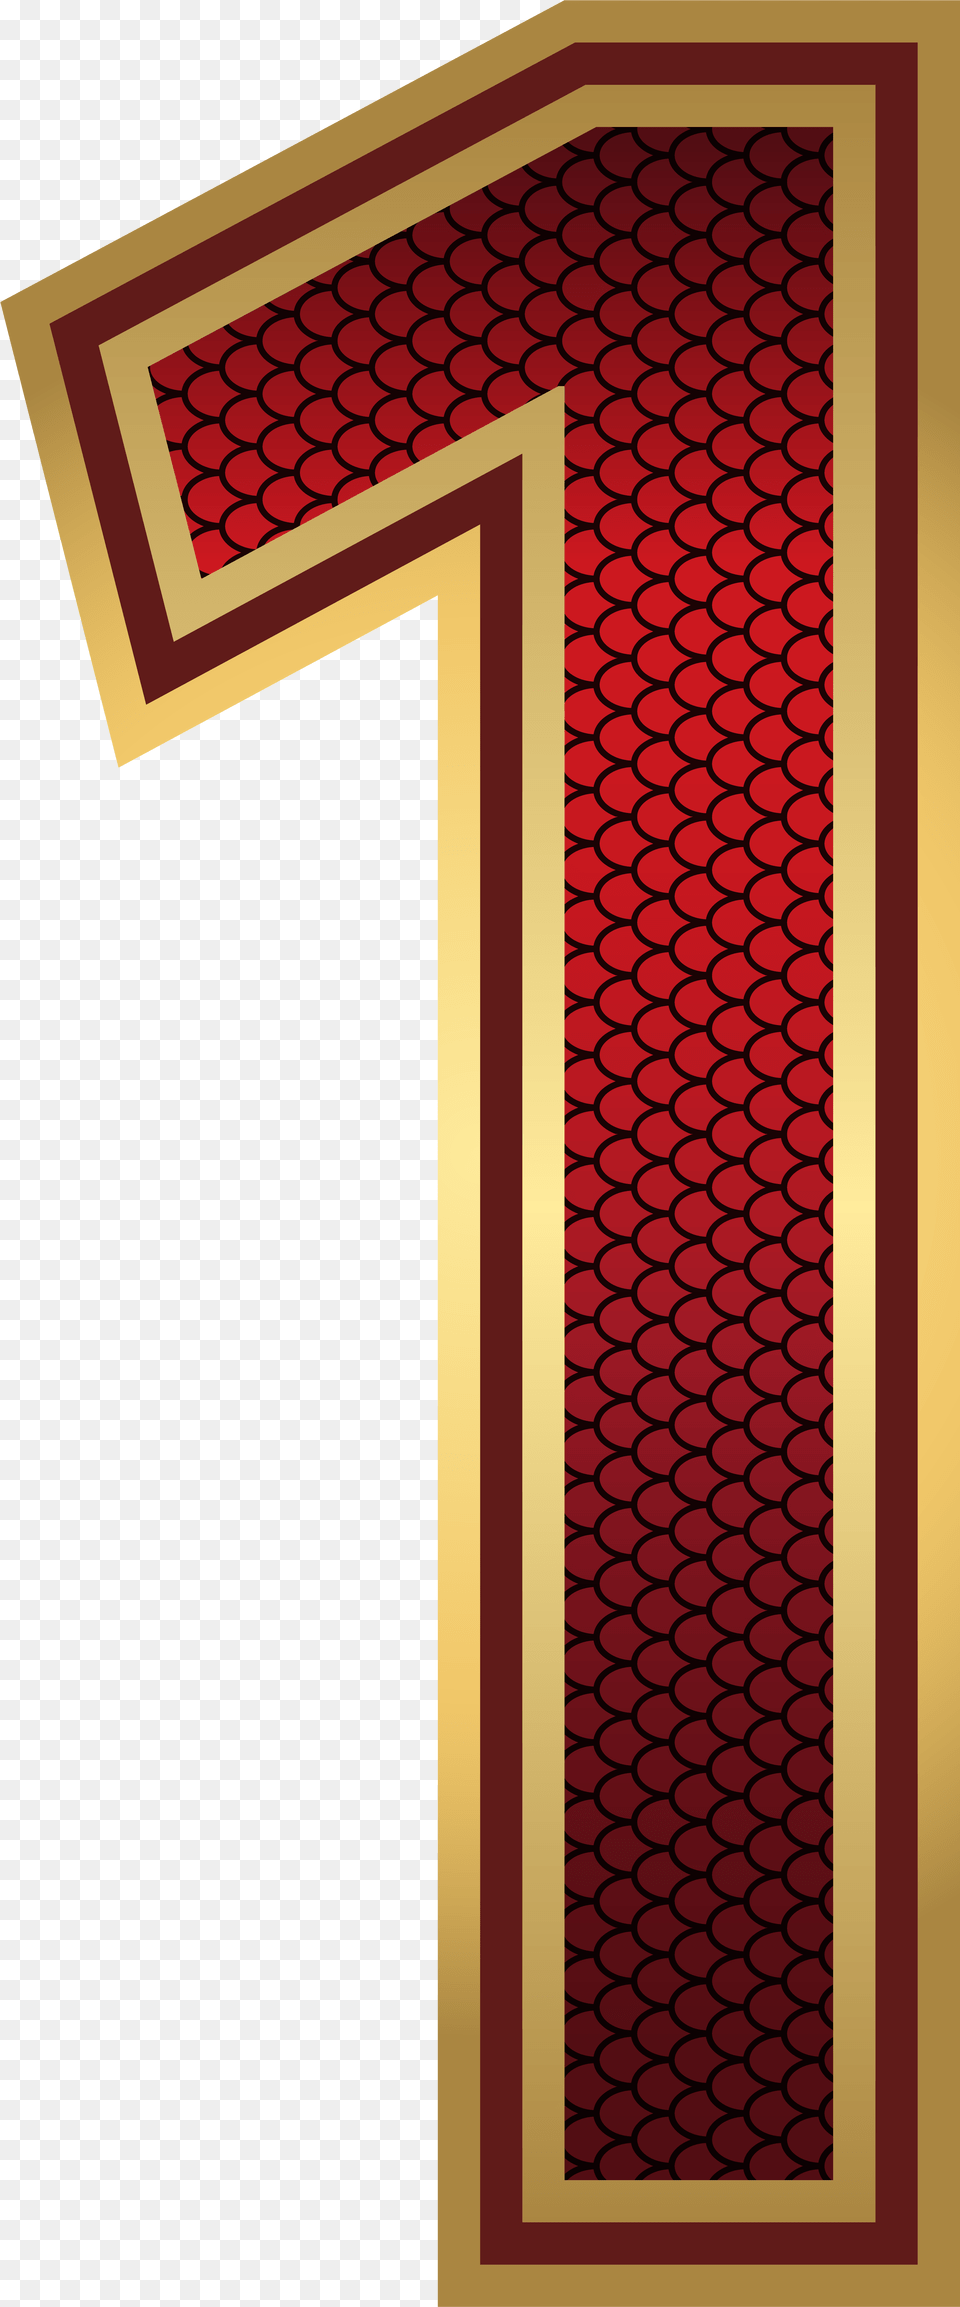 Red And Gold Number One Image Transparent Background Number 1 1, Symbol, Text, Cross Free Png